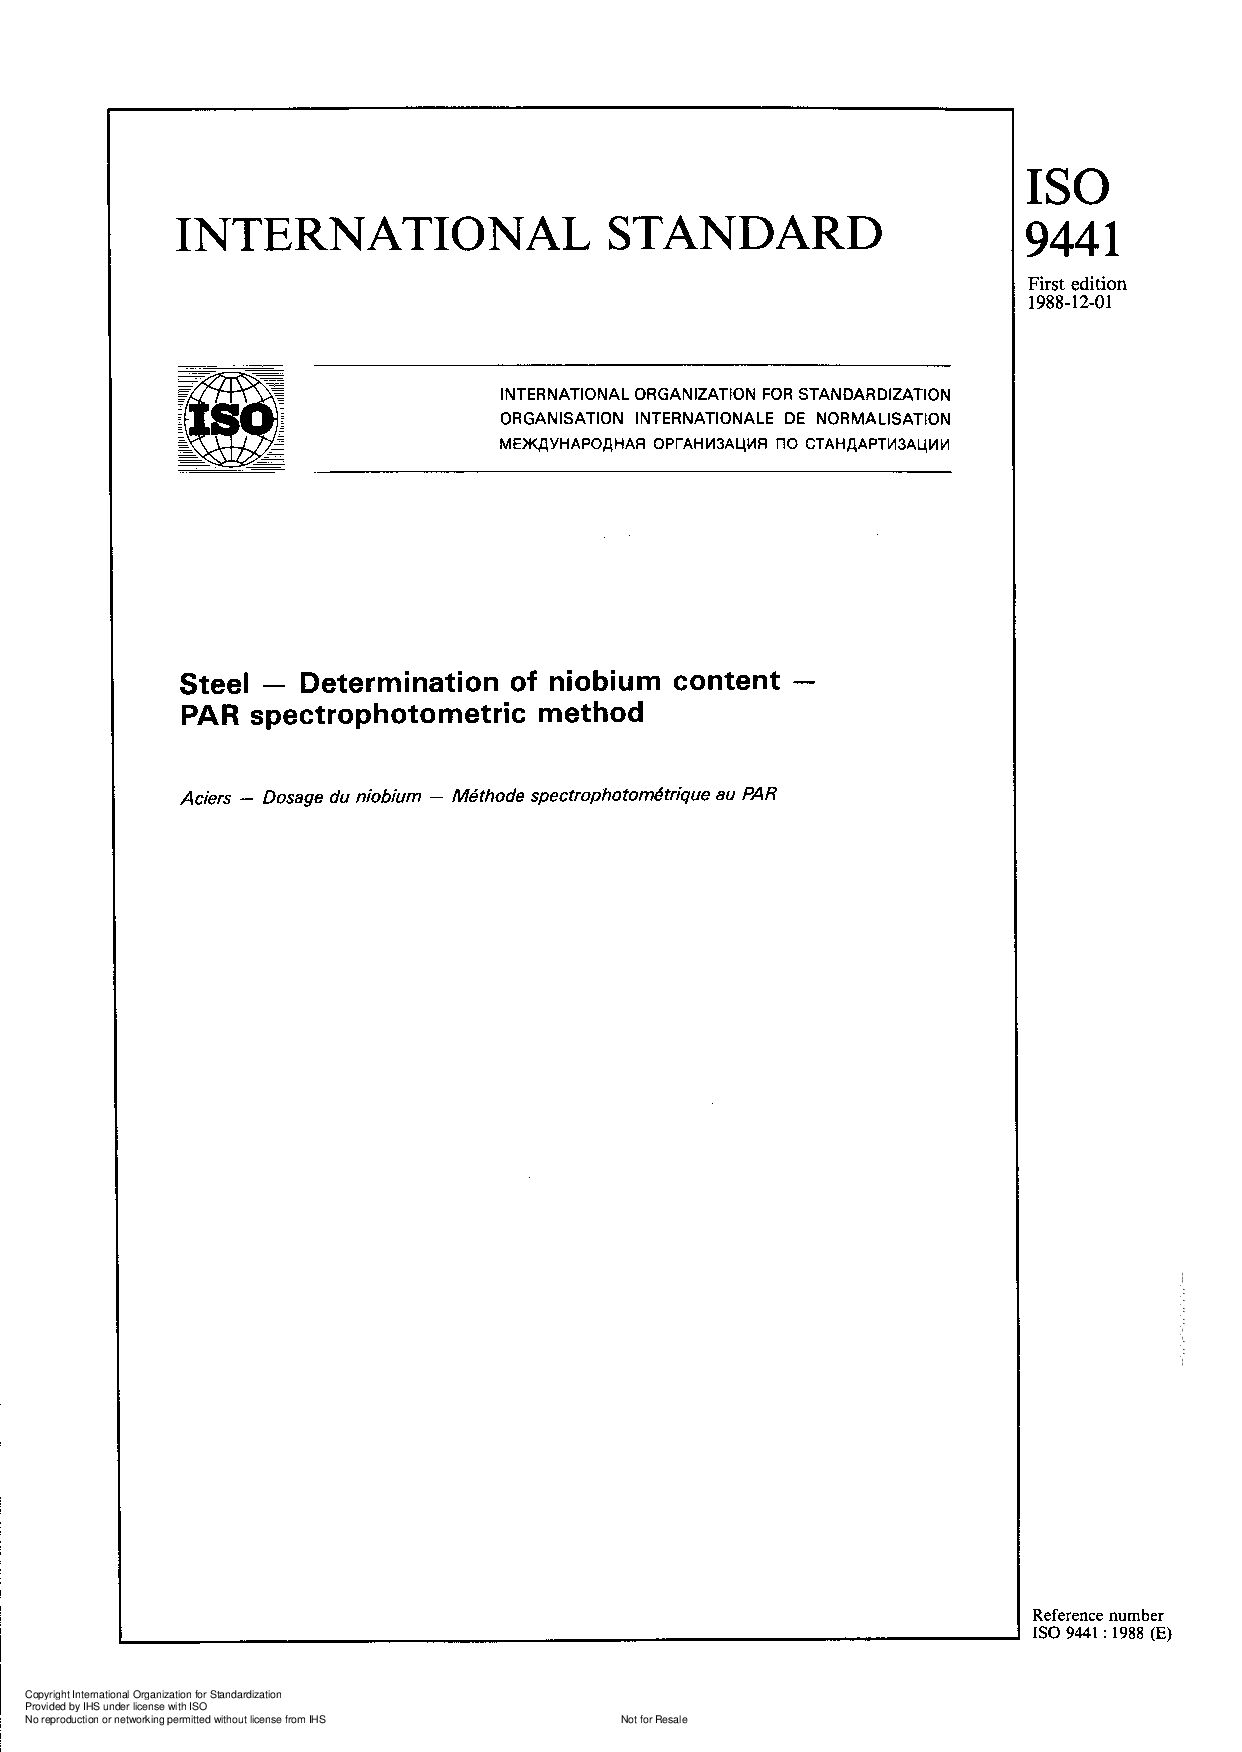 ISO 9441:1988